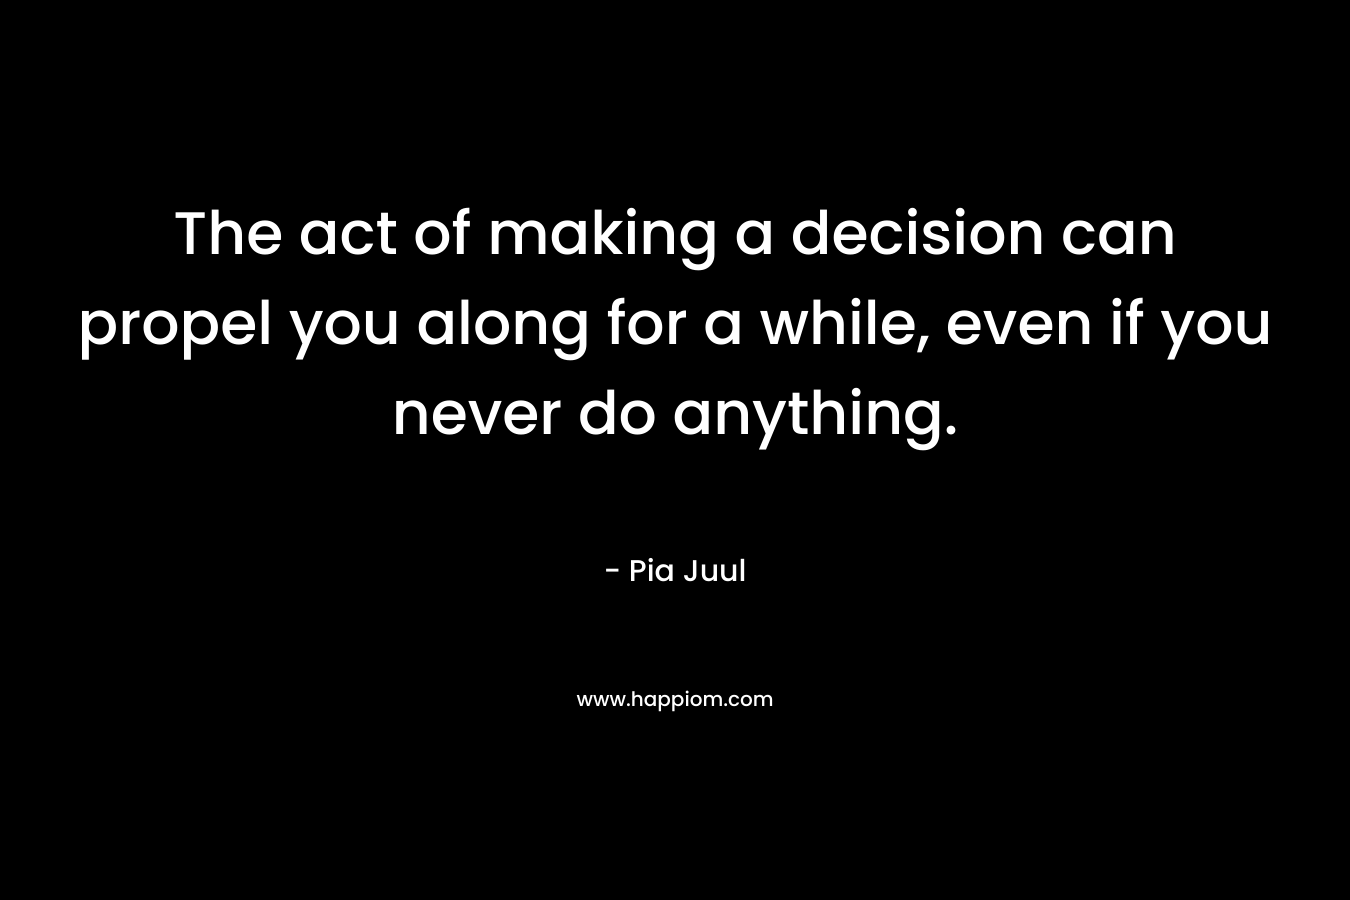 The act of making a decision can propel you along for a while, even if you never do anything. – Pia Juul